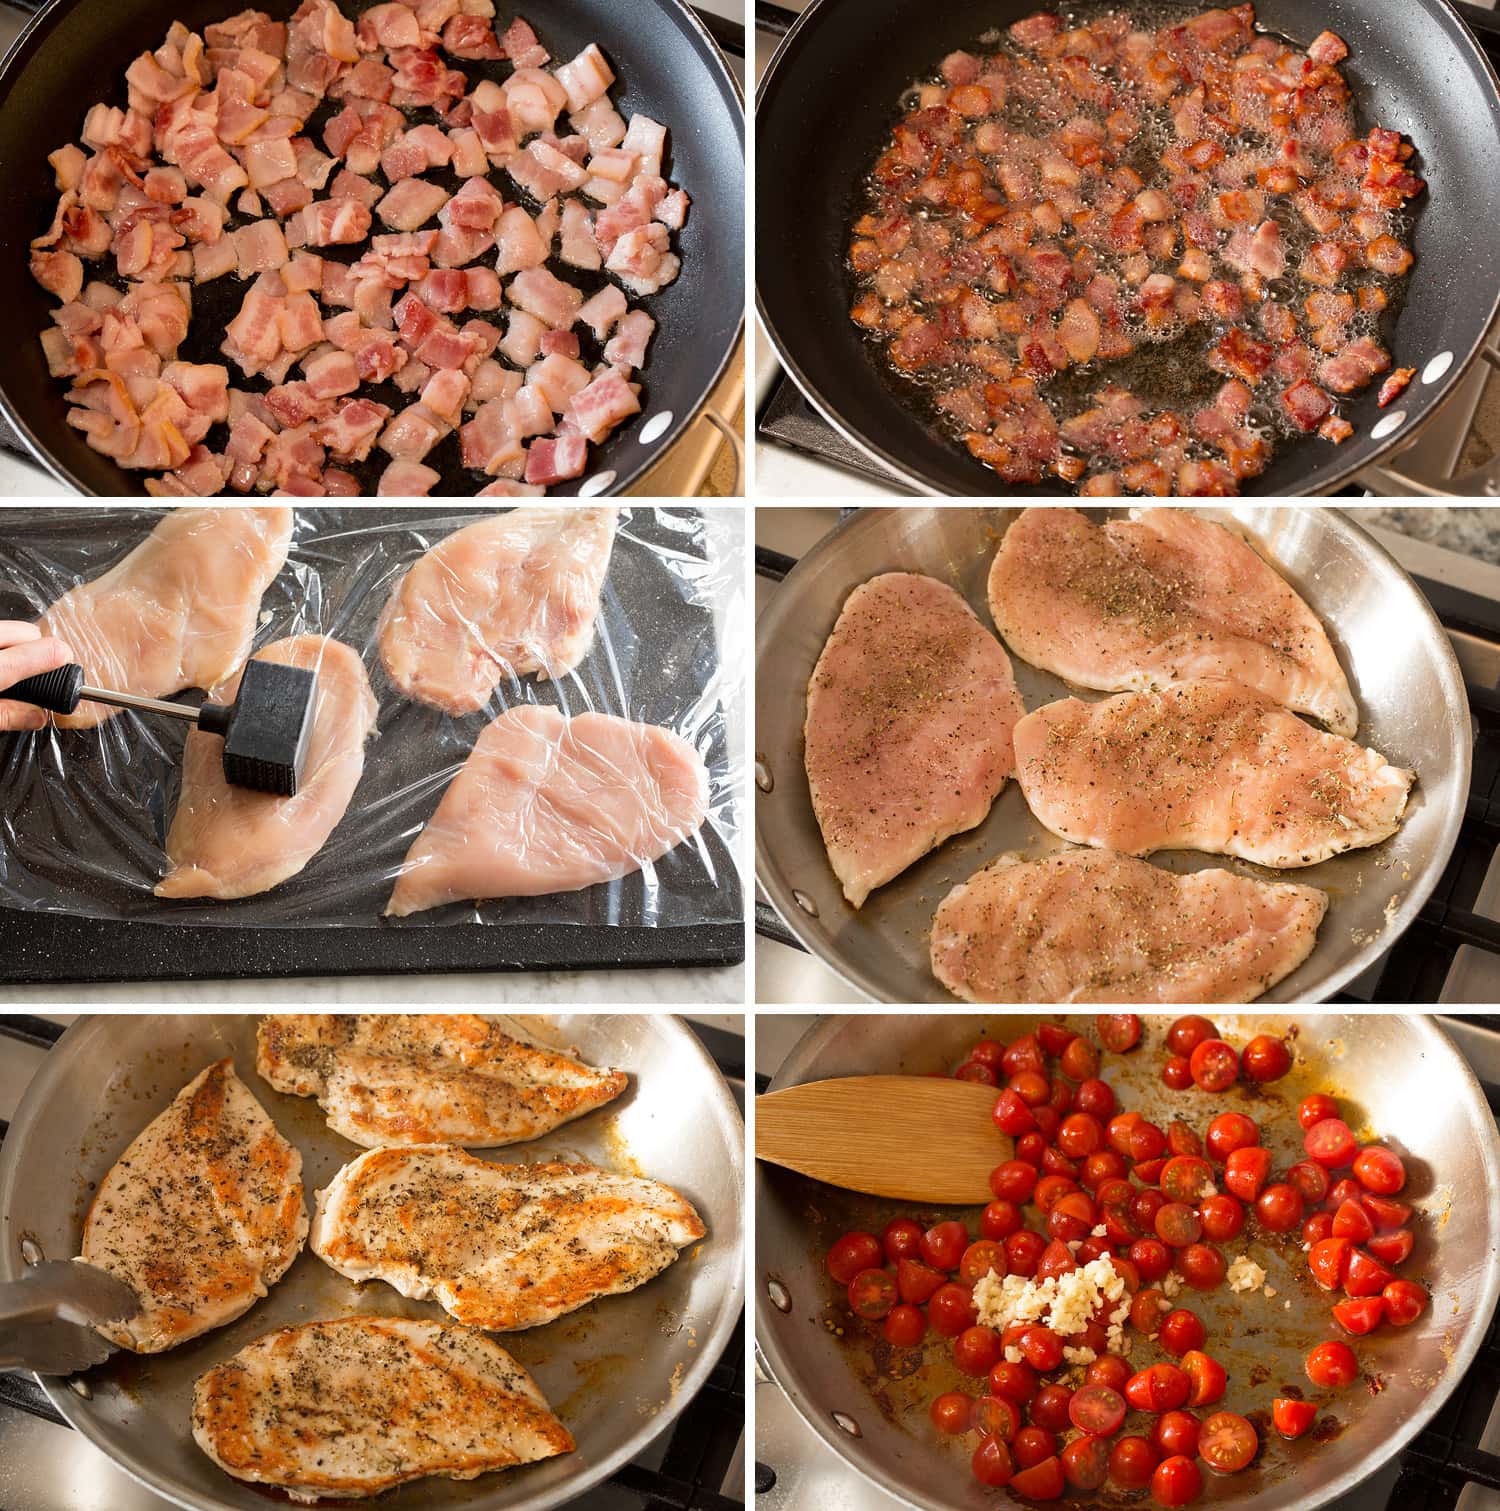 Steps for making pan seared chicken and cooking bacon.